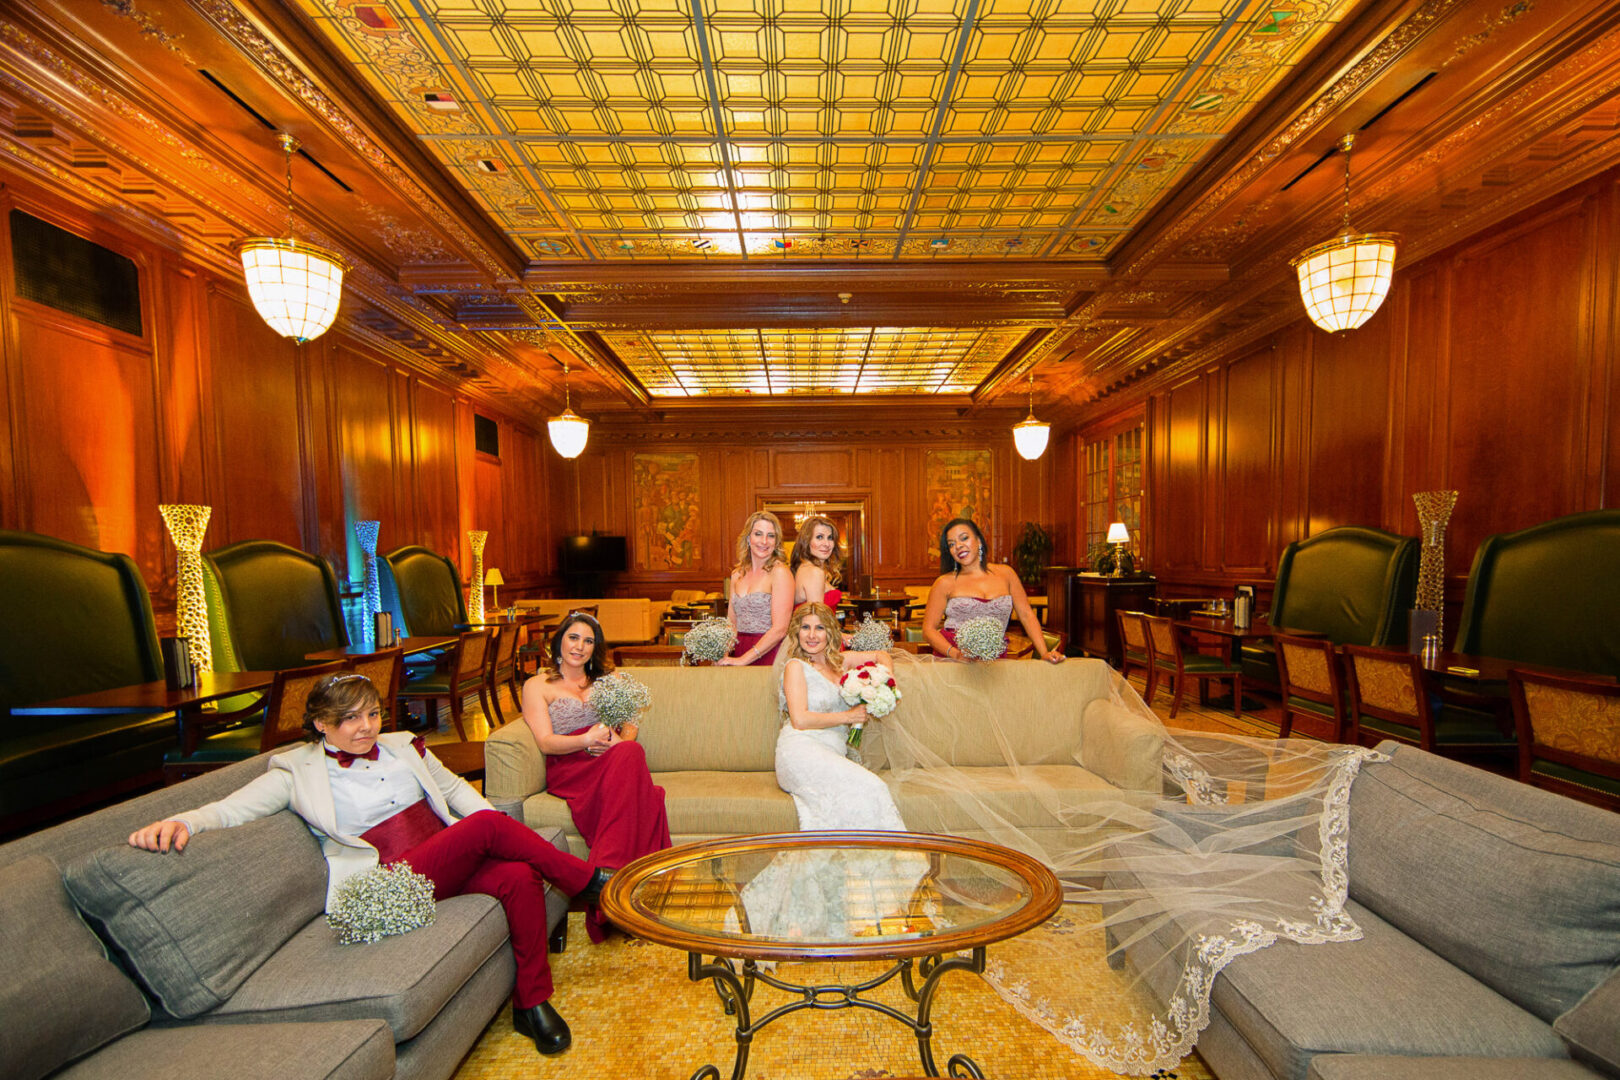 A bride sitting on a couch along with other girls